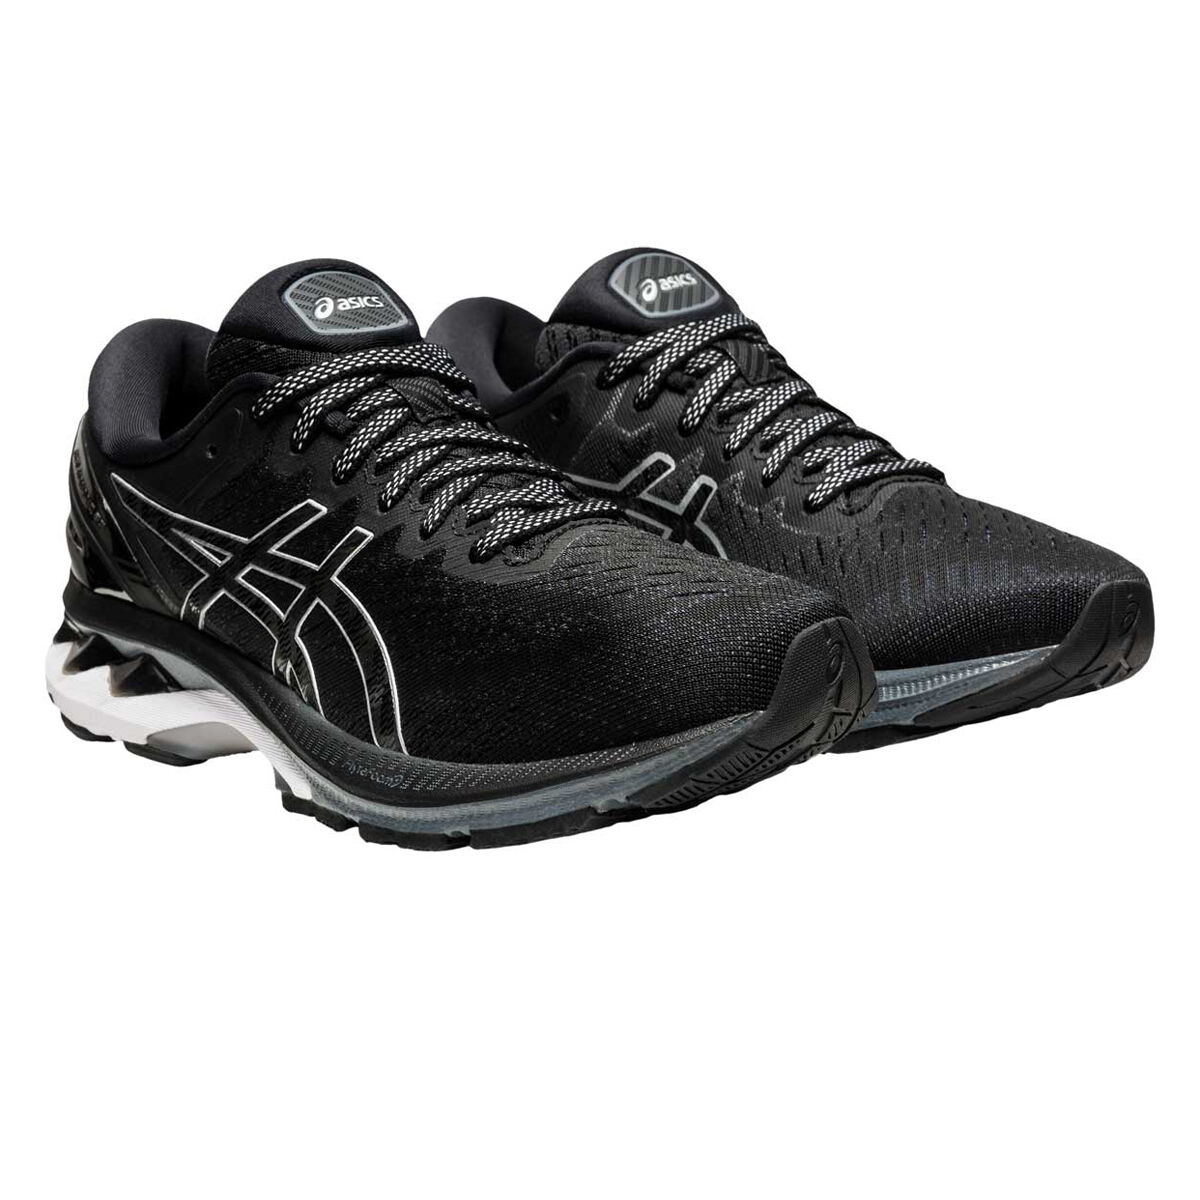 black asic womens shoes